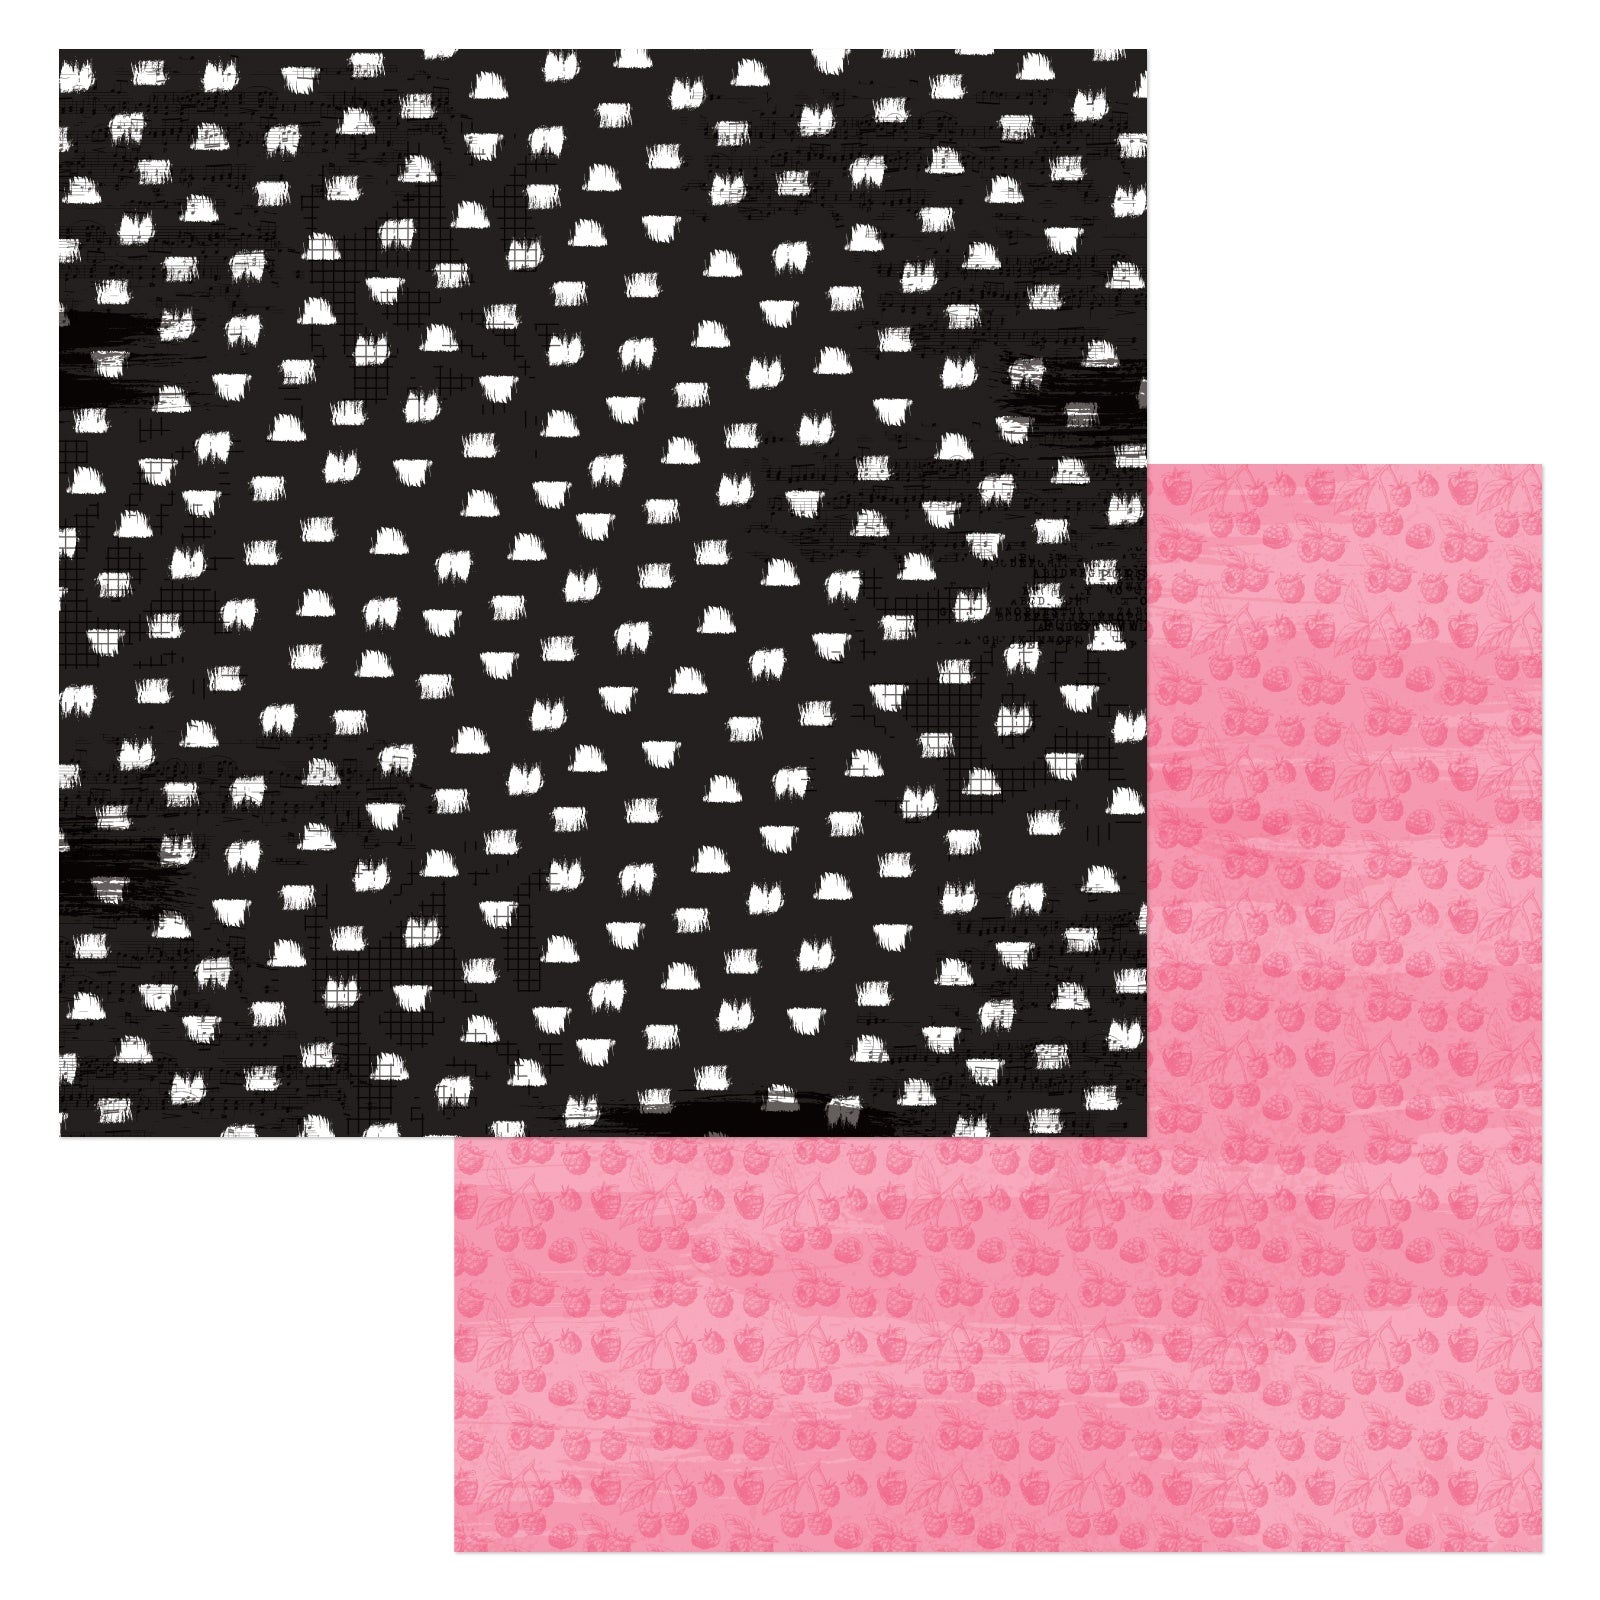 48 Pack: Dark Floral Cardstock by Recollections™, 12 x 12 